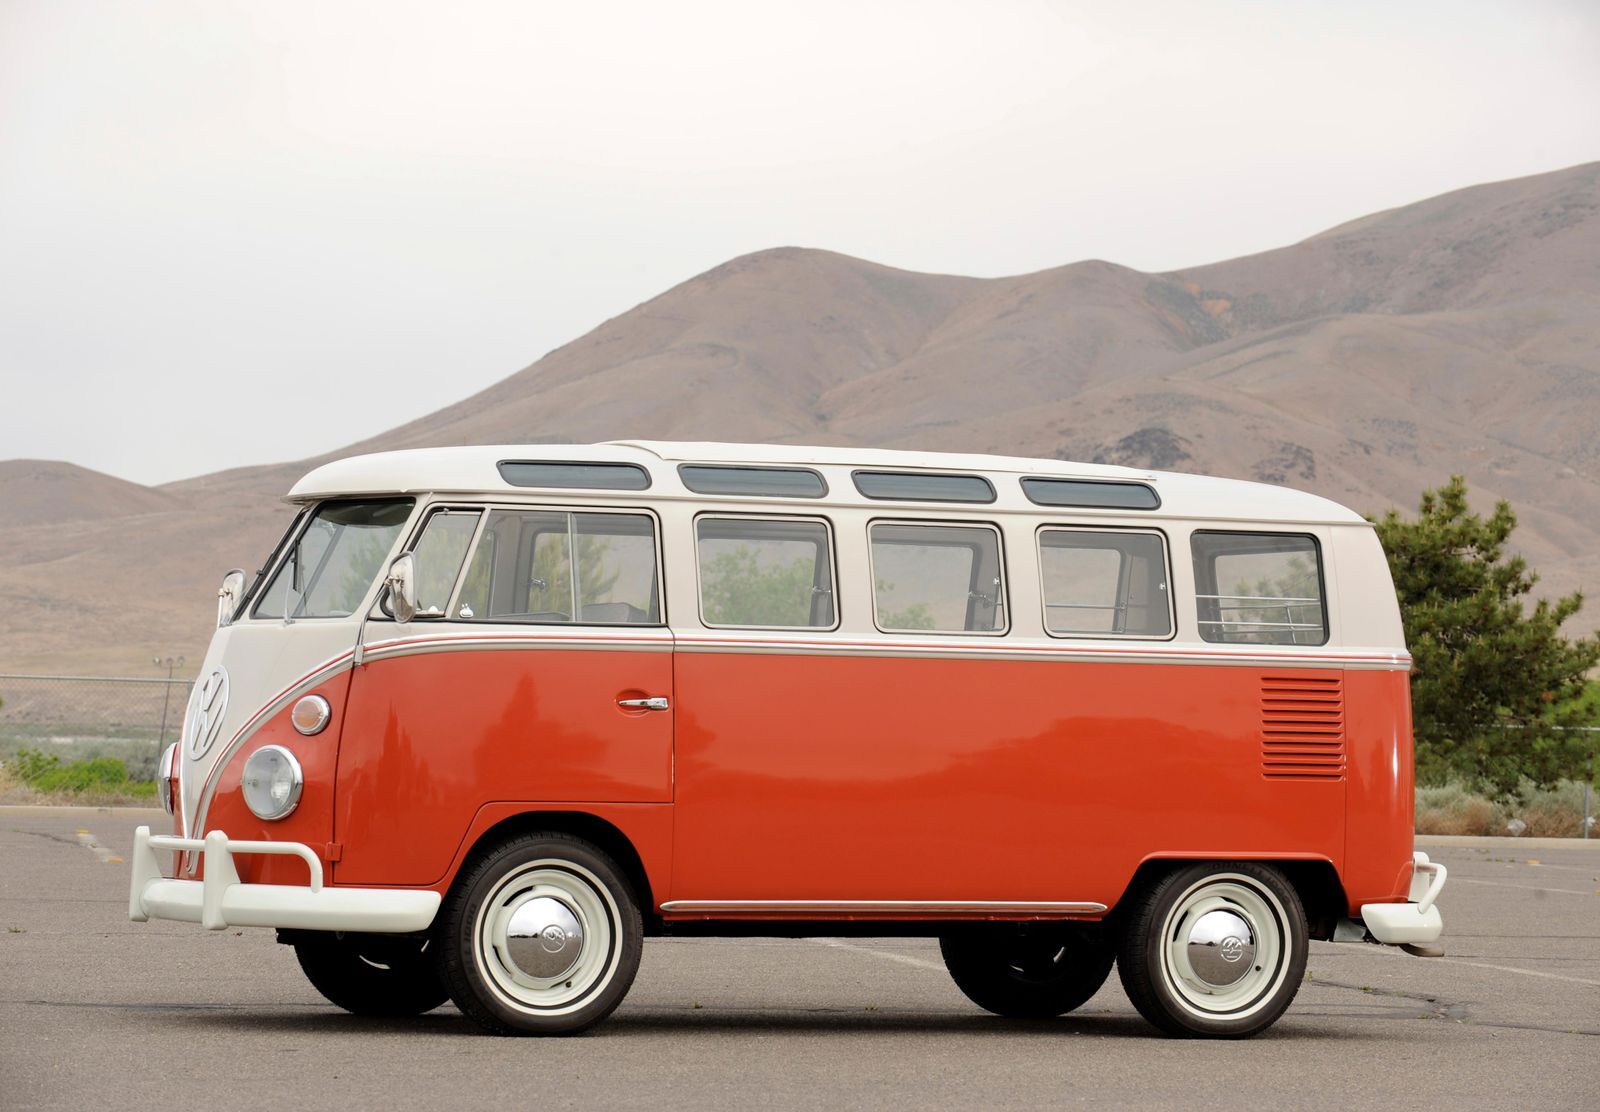 A version of the Apple Car looked like the VW microbus - The Apple Car could have changed the face of the automobile industry